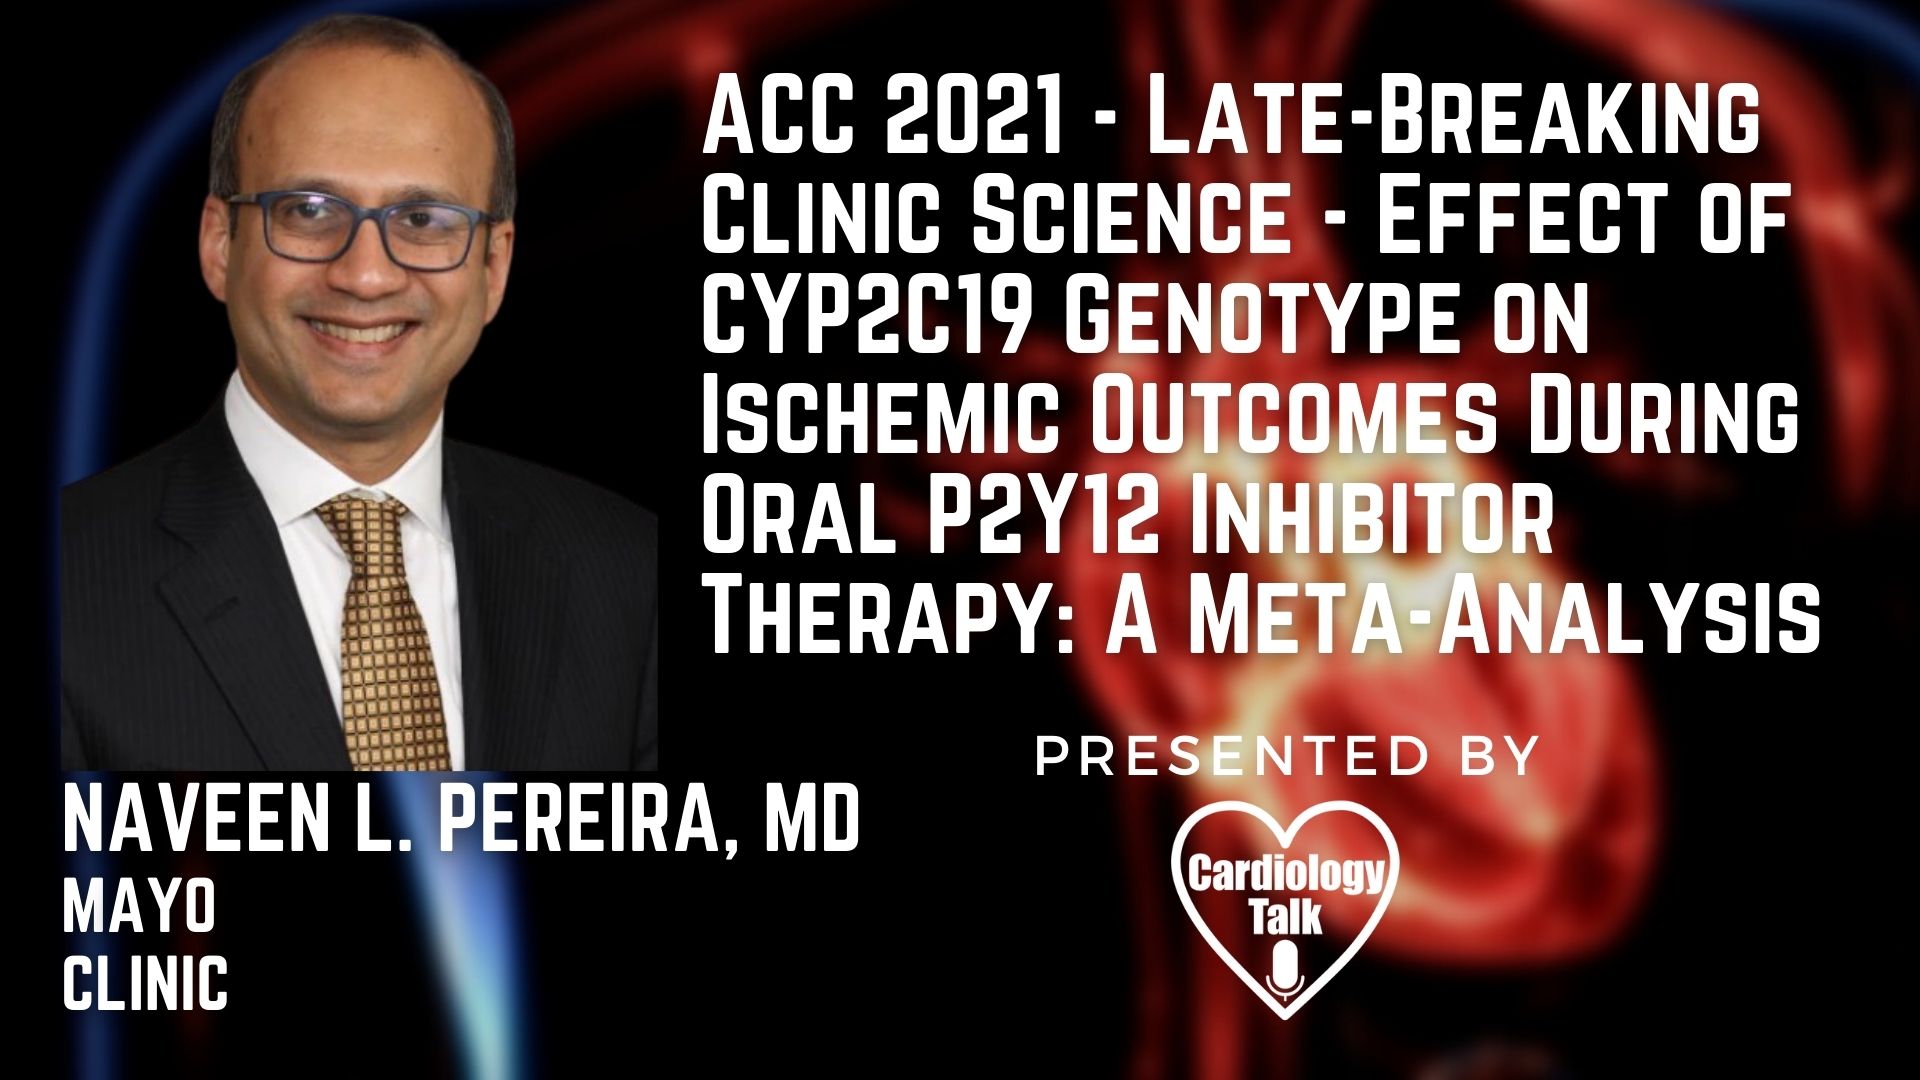 Naveen L. Pereira, MD @nl_pereira @MayoClinic @MayoClinicCV #ACC21 #CoronaryPharmacotherapy #Cardiology #Research Effect of CYP2C19 Genotype on Ischemic Outcomes During Oral P2Y12 Inhibit...